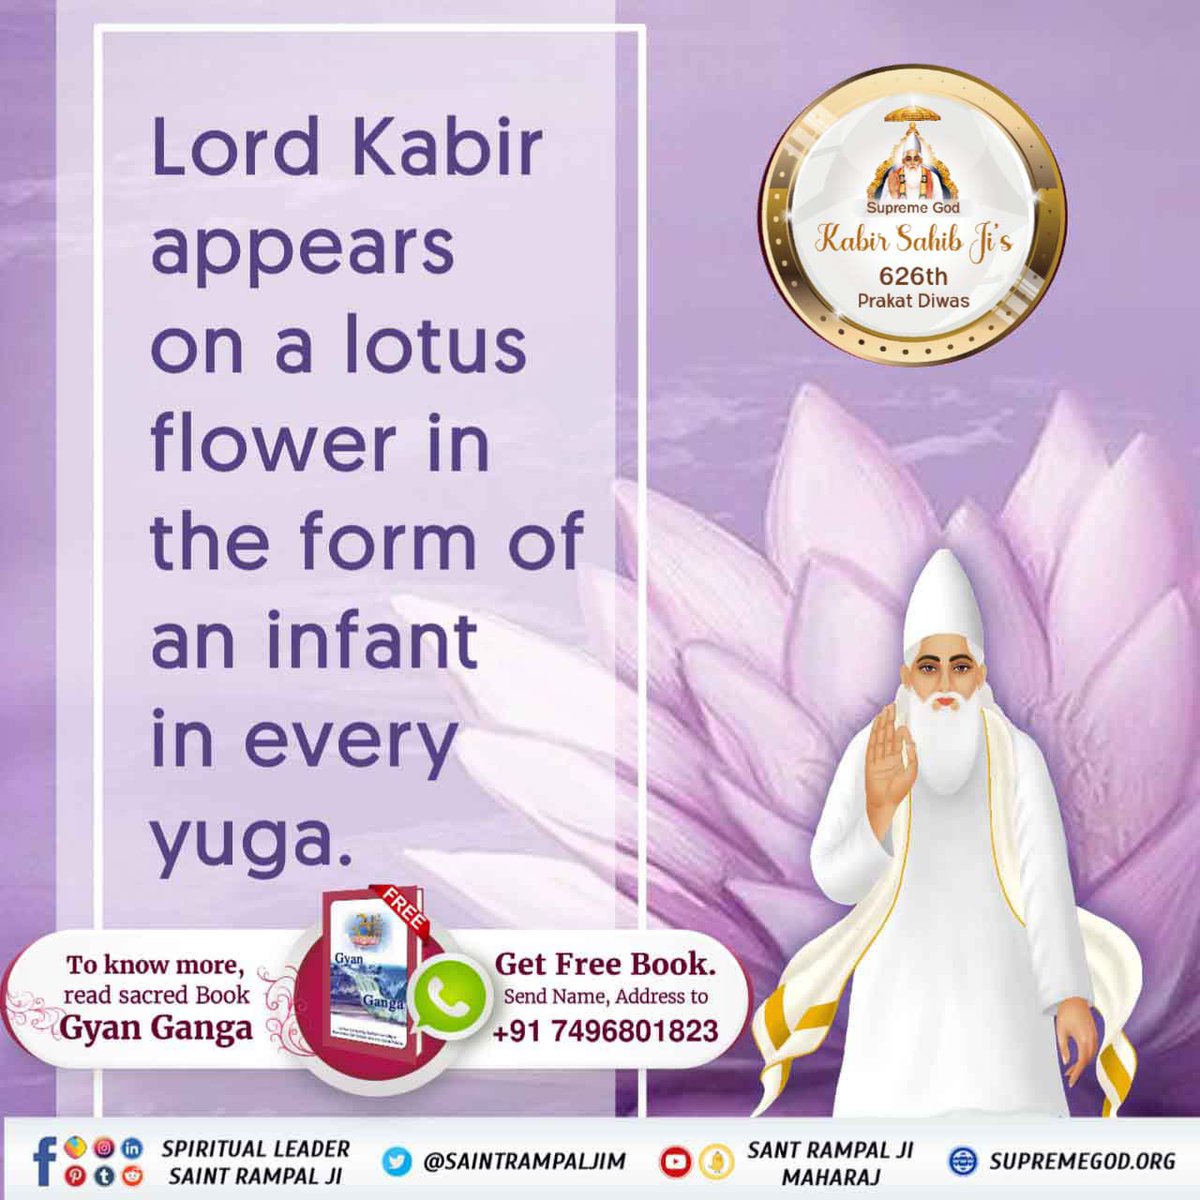 In, 1398 Lord Kabir Ji descended from his Supreme Abode Satlok and appeared on a lotus in Lehartara Pond in Kashi, Uttarpradesh to perform his divine plays in order to grant complete Salvation to his beloved souls
#626th_GodKabir_PrakatDiwas

Watch Live Program